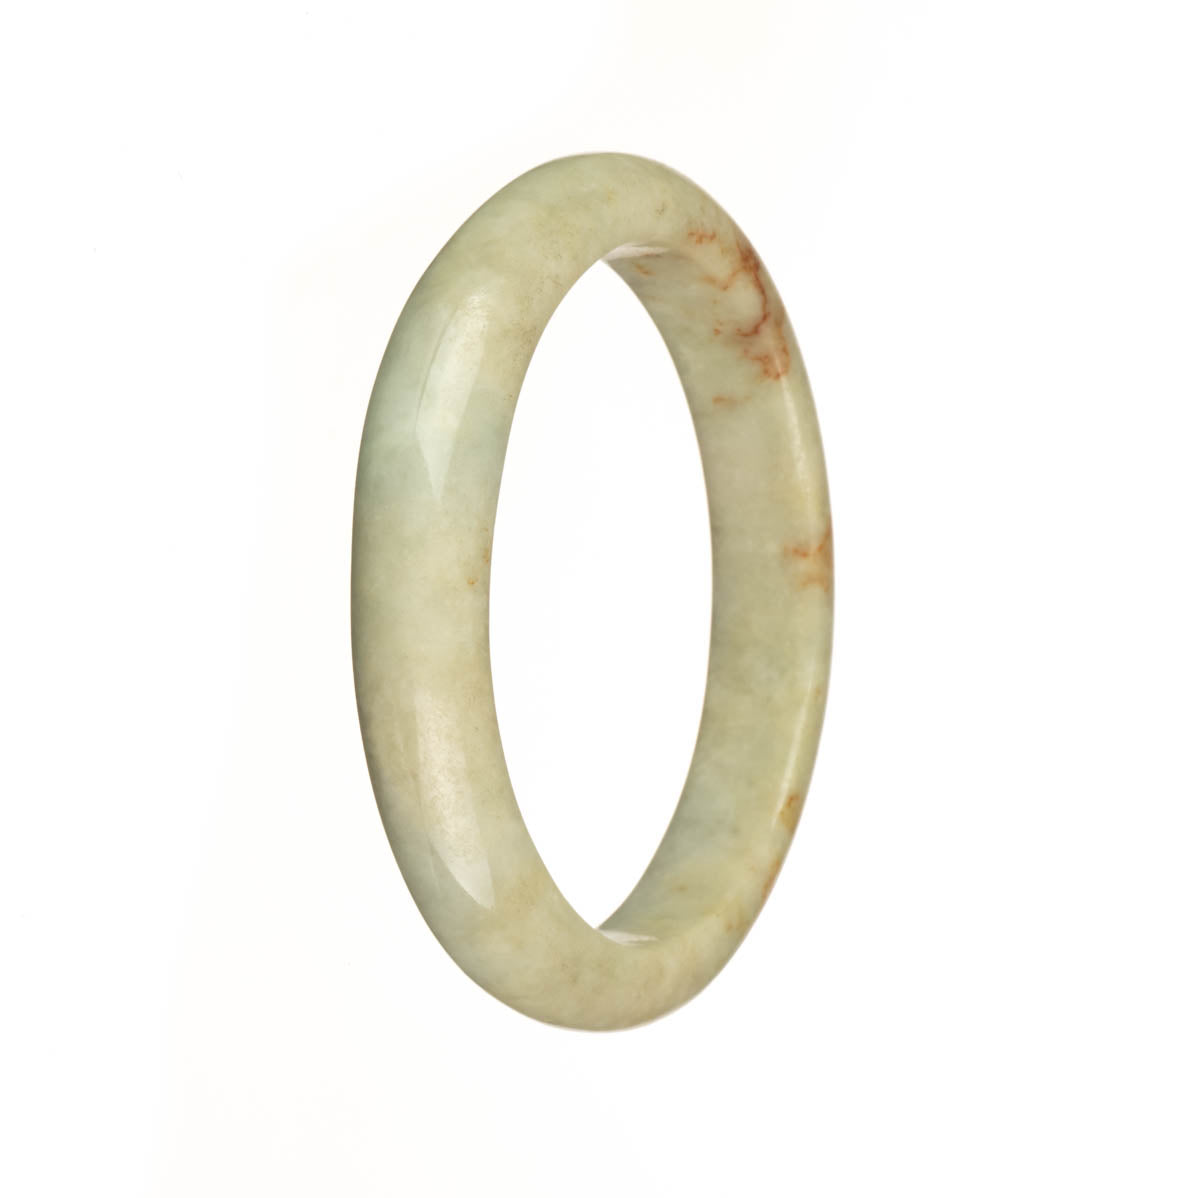 An authentic grade A white jade bangle with red patterns, measuring 56mm in a semi-round shape. A beautiful piece from MAYS GEMS.